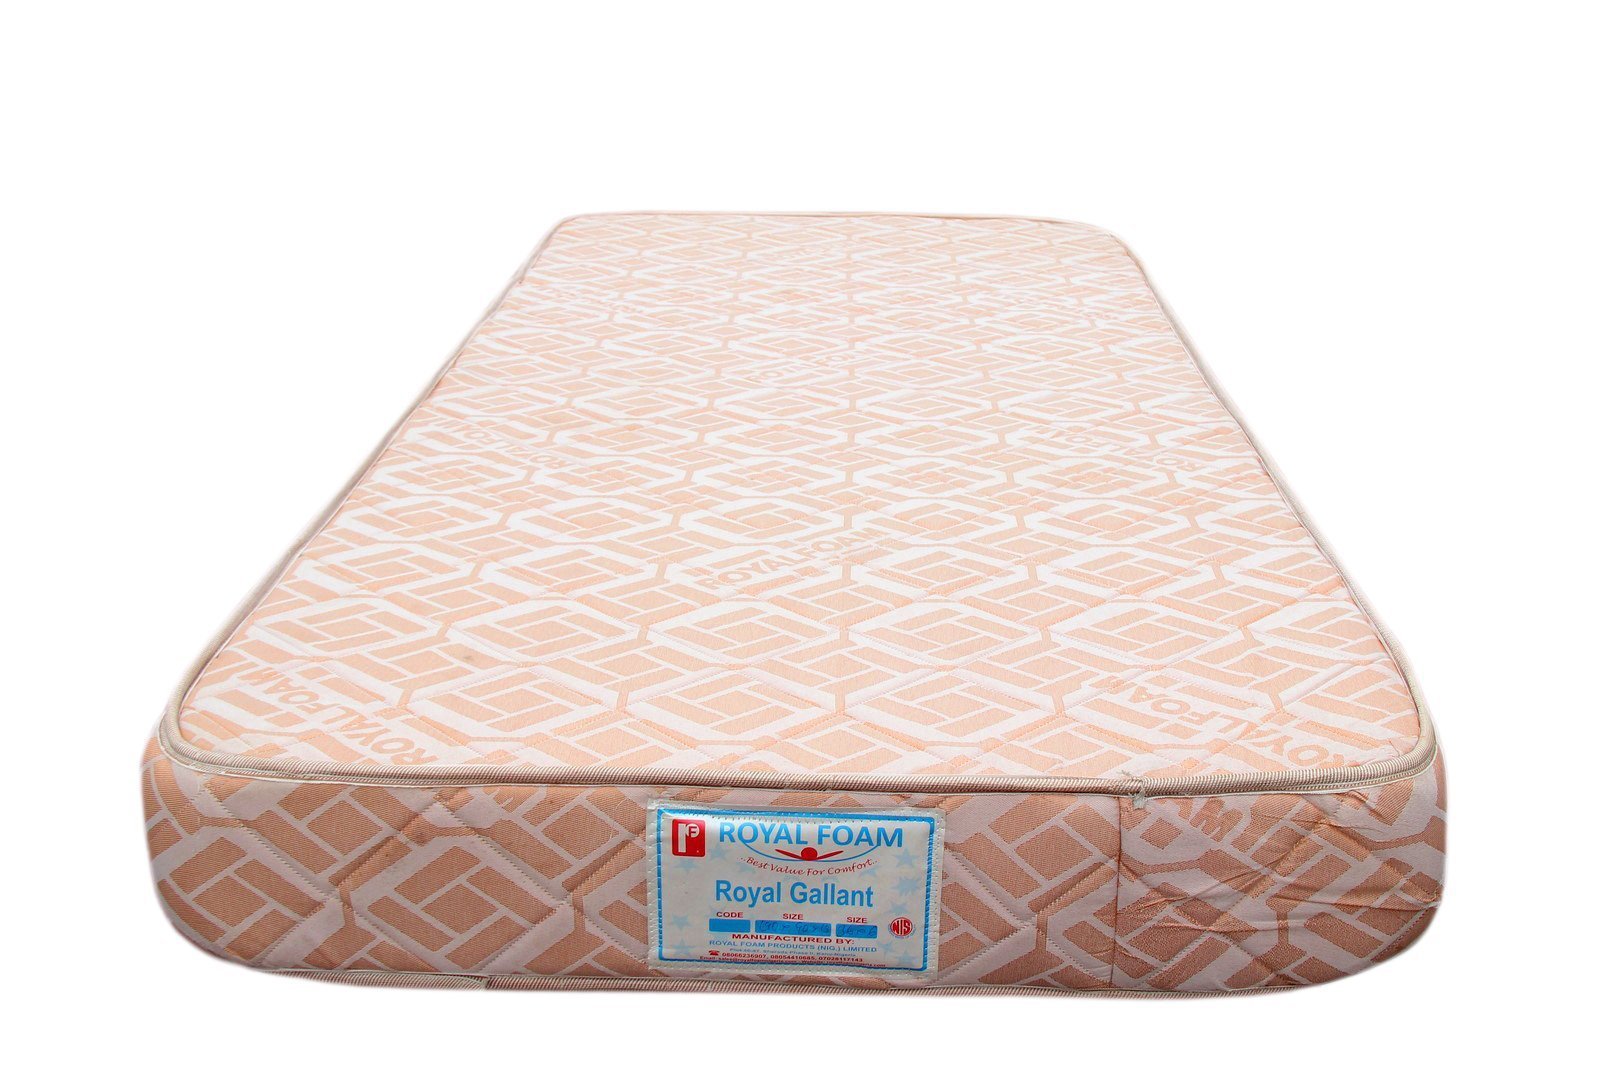 Royal Gallant Plus JACQUARD fabric-Fully Quilted Mattress 190 X 210 X 20 CM(6ft x 7ft x 8inches) 2 Adult( King Size)(Lagos Only)